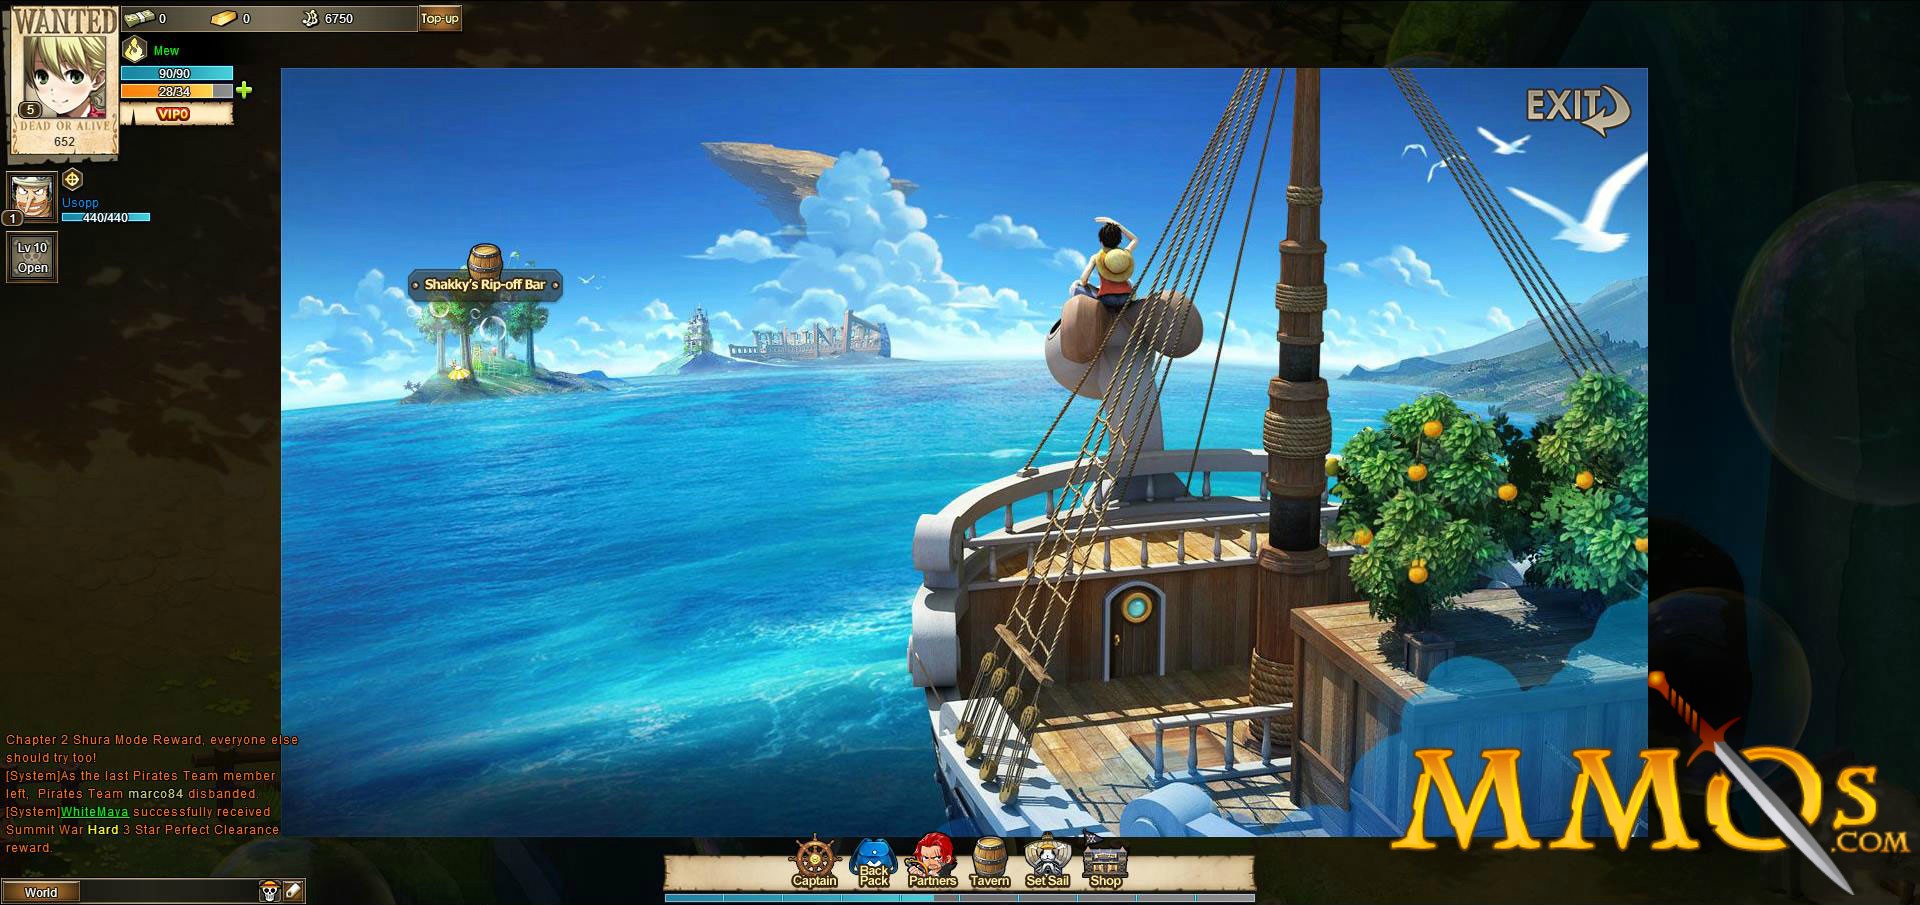 one piece Online « One Piece Online, let's go to play